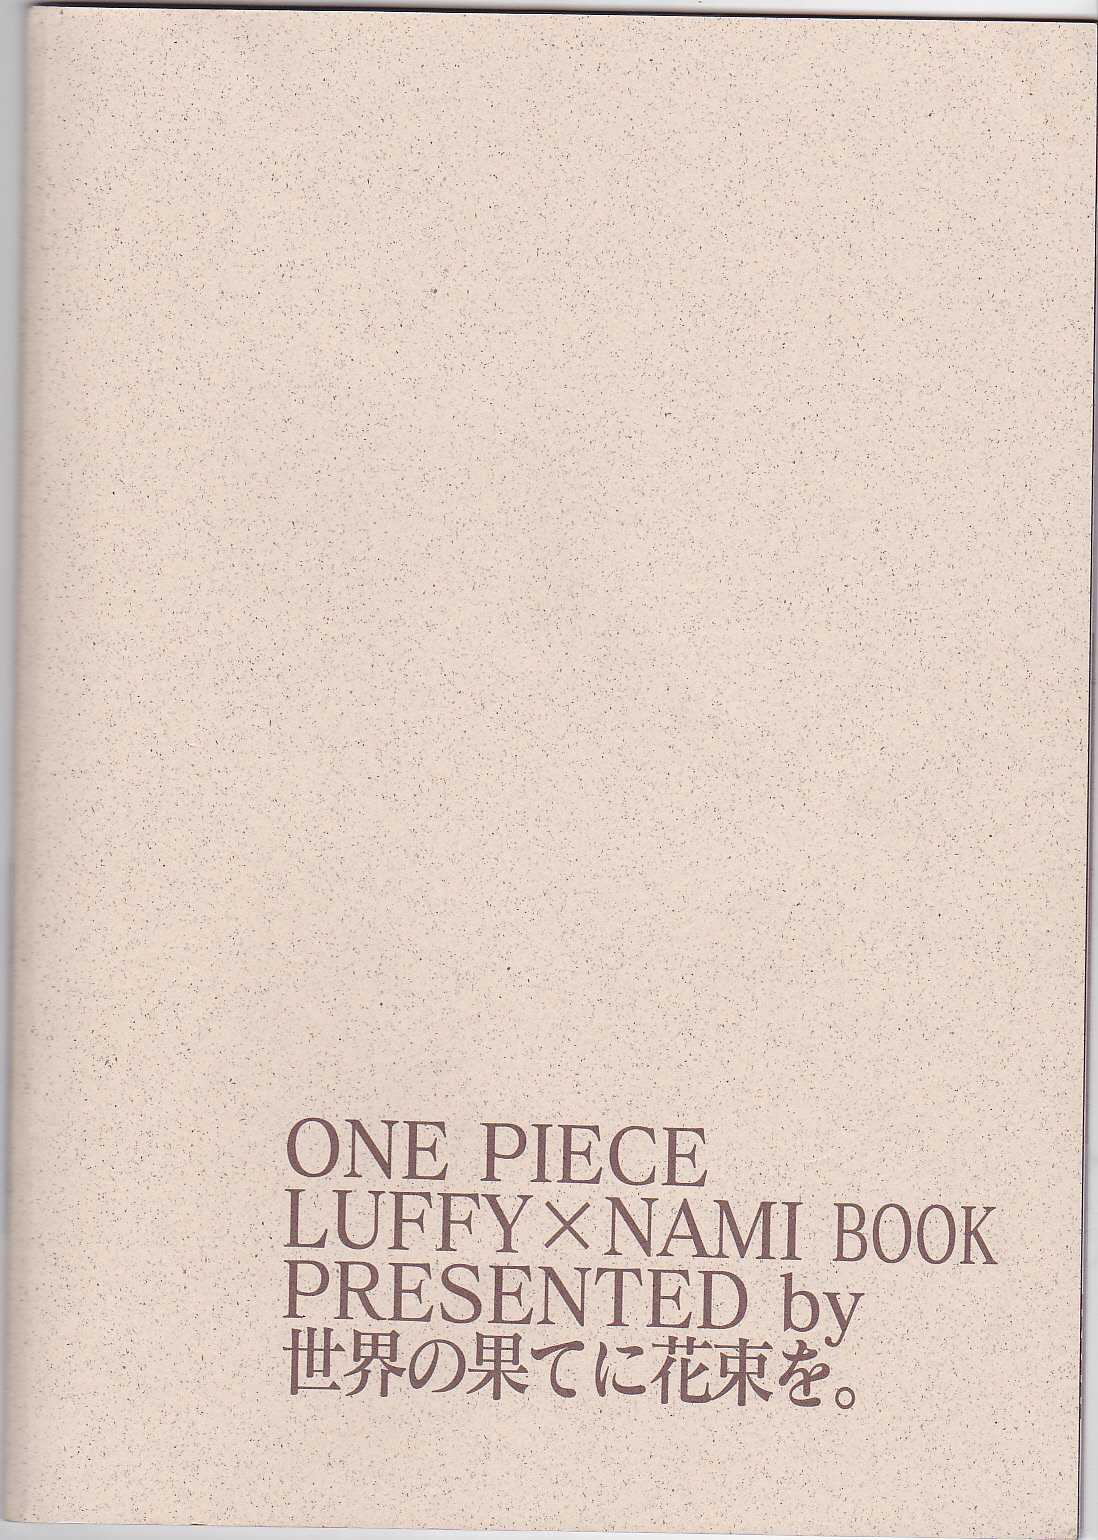 one piece luffy x nami book presented by % 